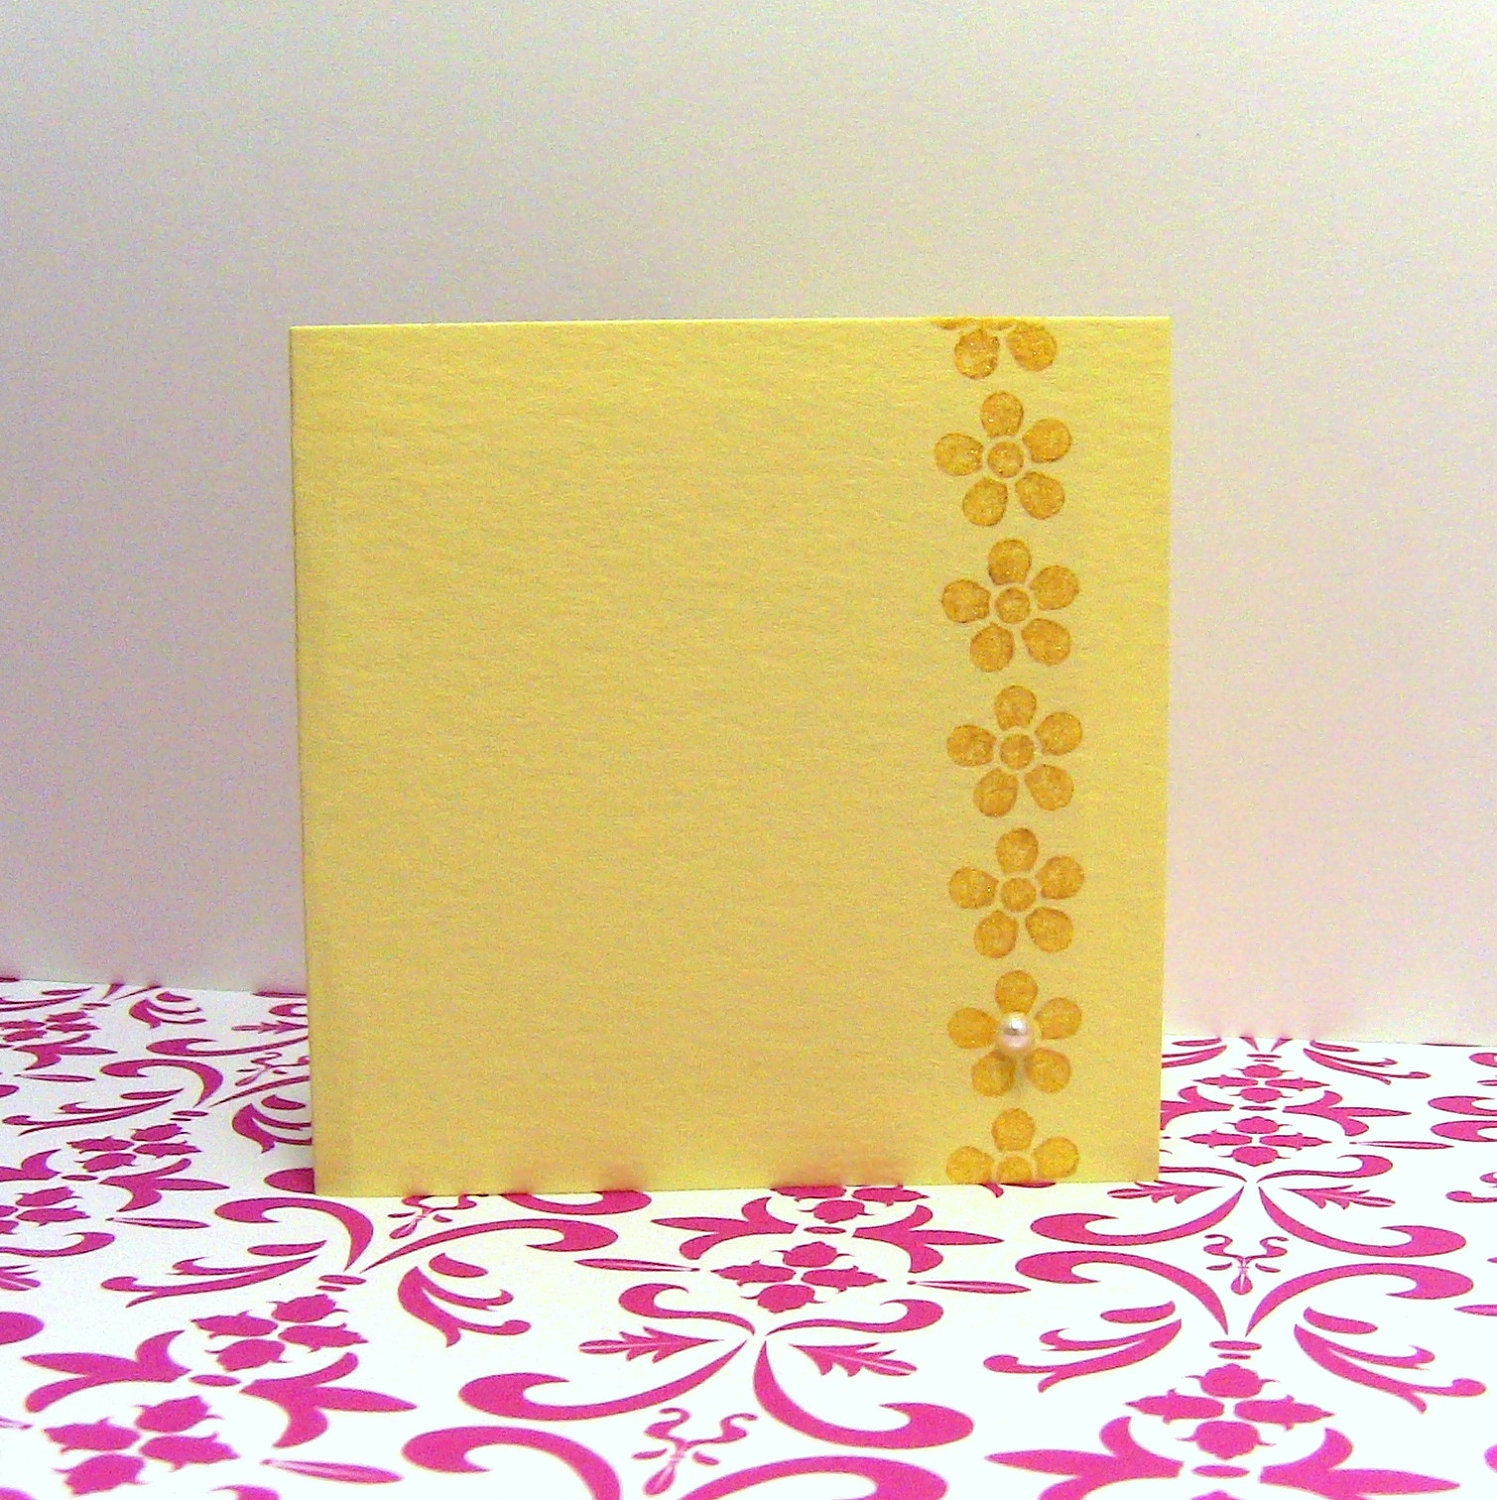 Set of 10 Personalized Metallic Flower Blank Mini Cards / Tag with Pearl or Rhinestone Embellishment - Made To Order